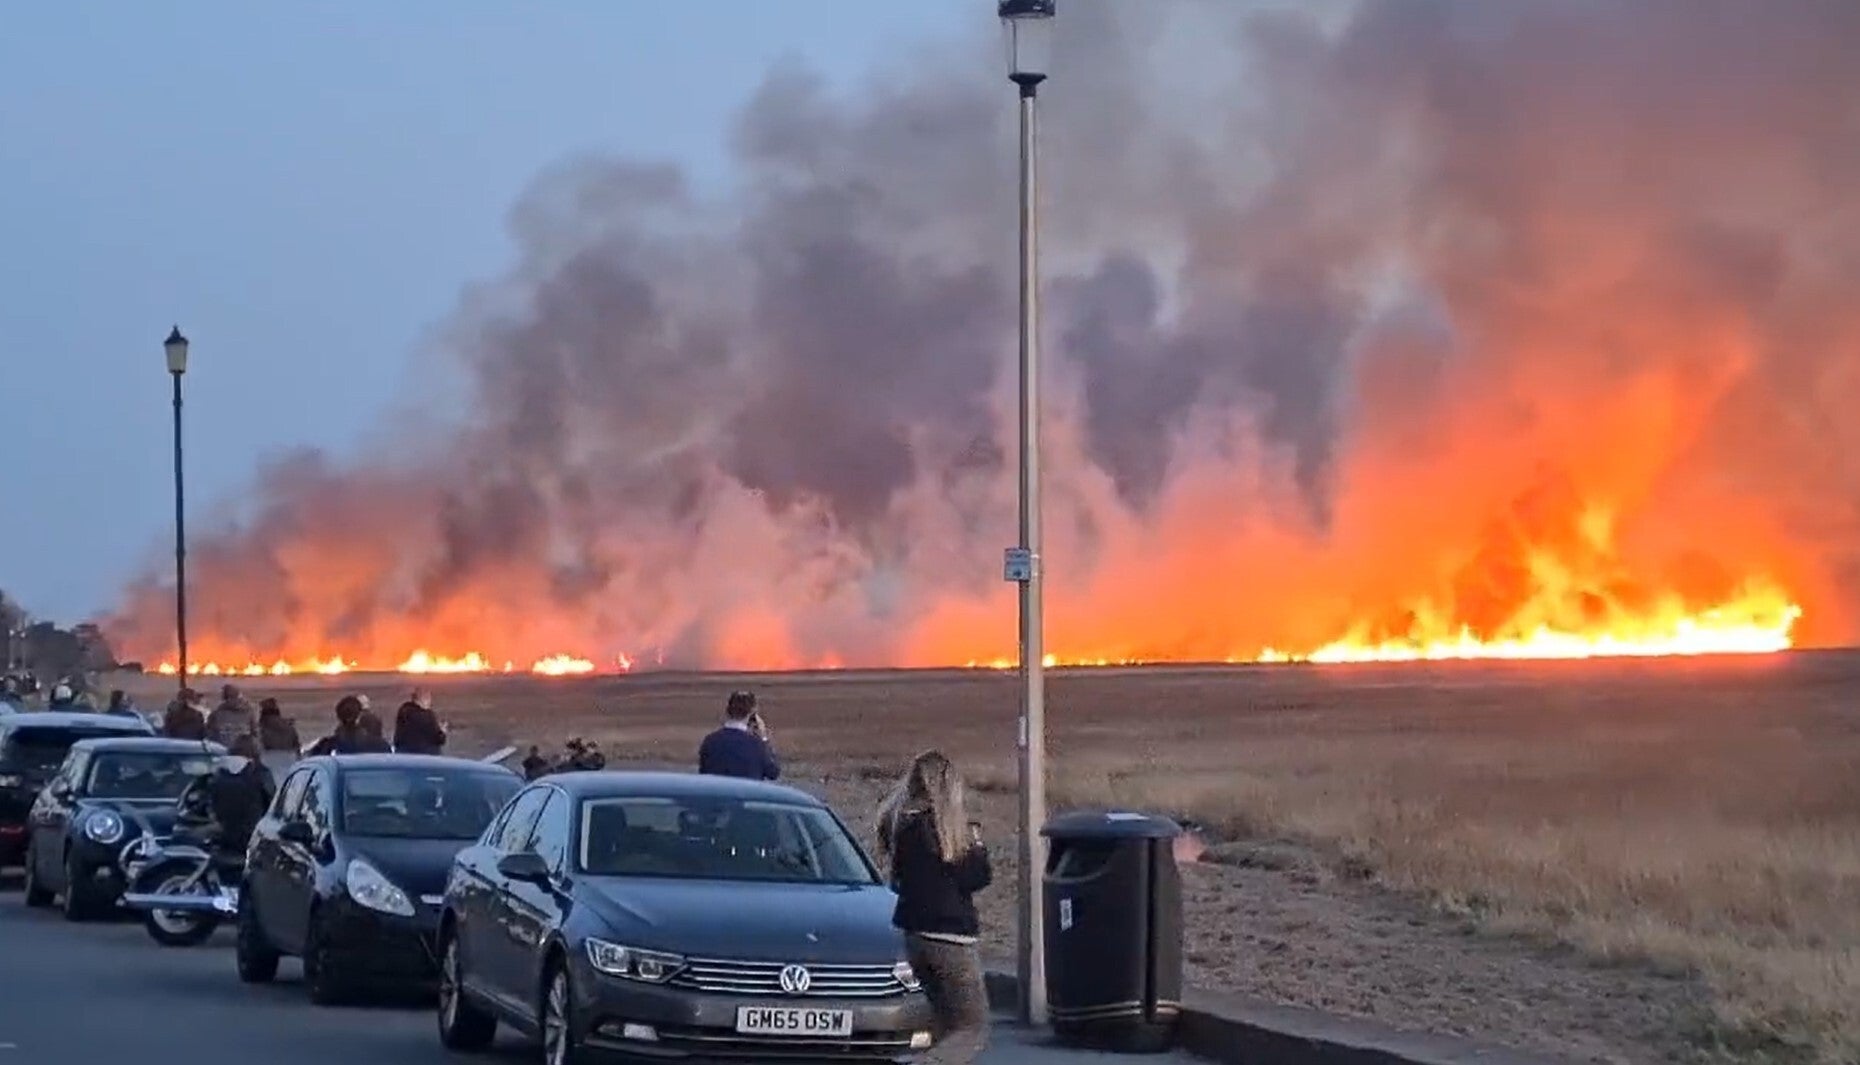 A suspected deliberately started blaze on marshland on the Wirral (@ilovetolift13/PA)